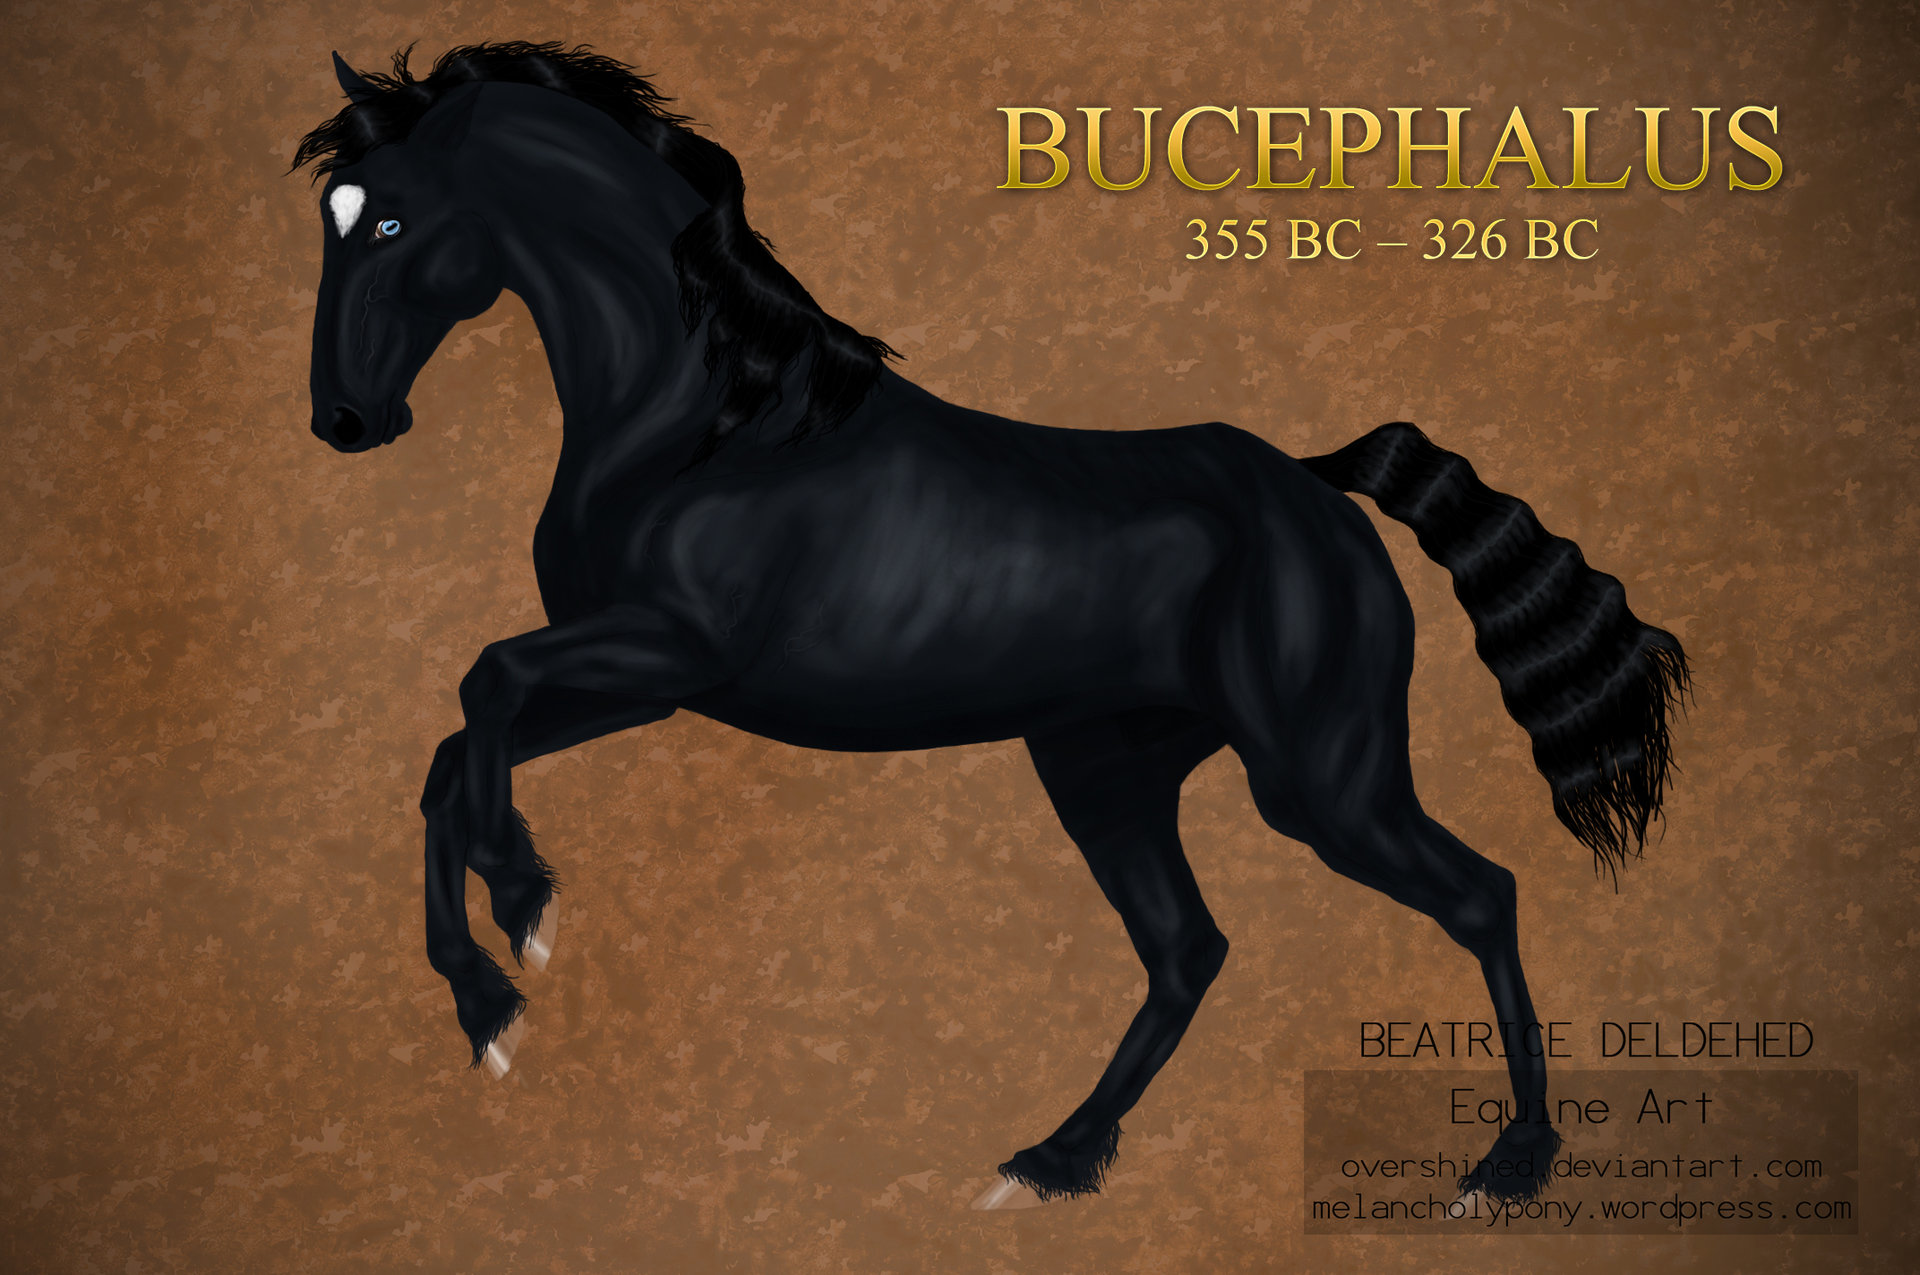 bucephalus_the_great_by_overshined-d3duqp9.jpg